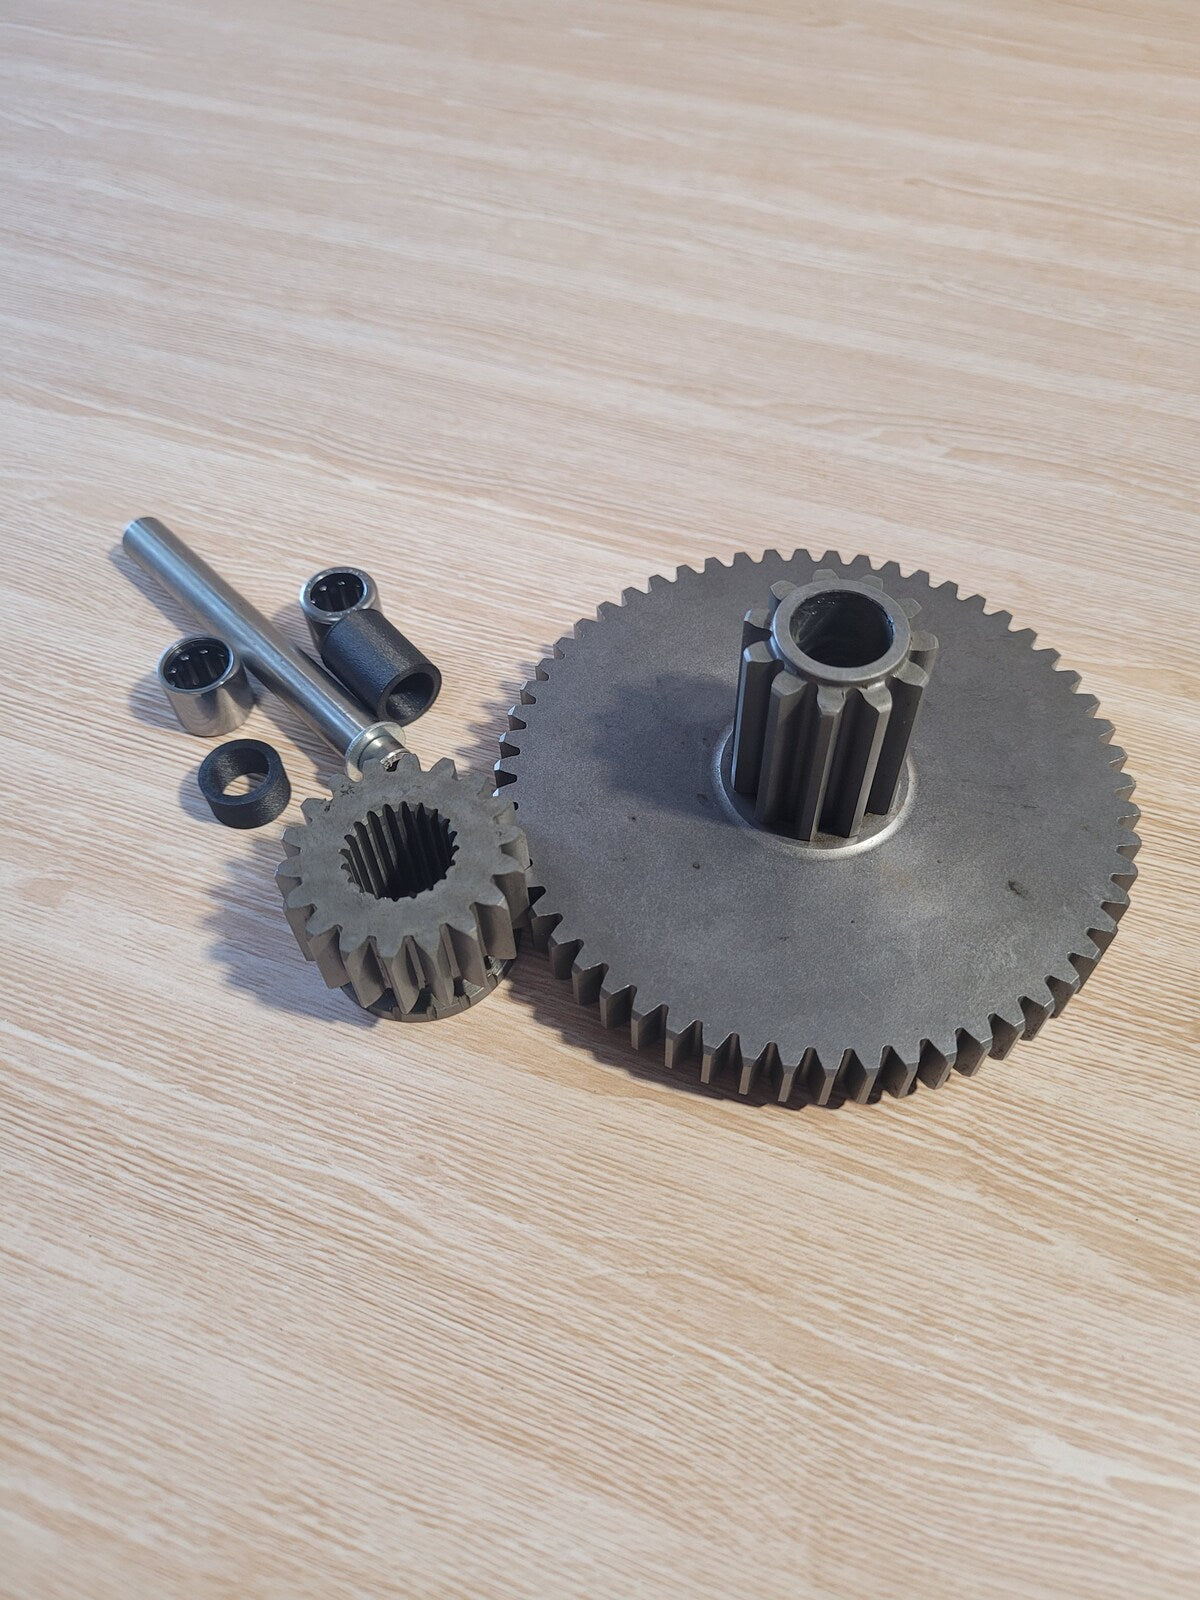 Gigglepin Replacement Top Housing Gearset +15% Ratio